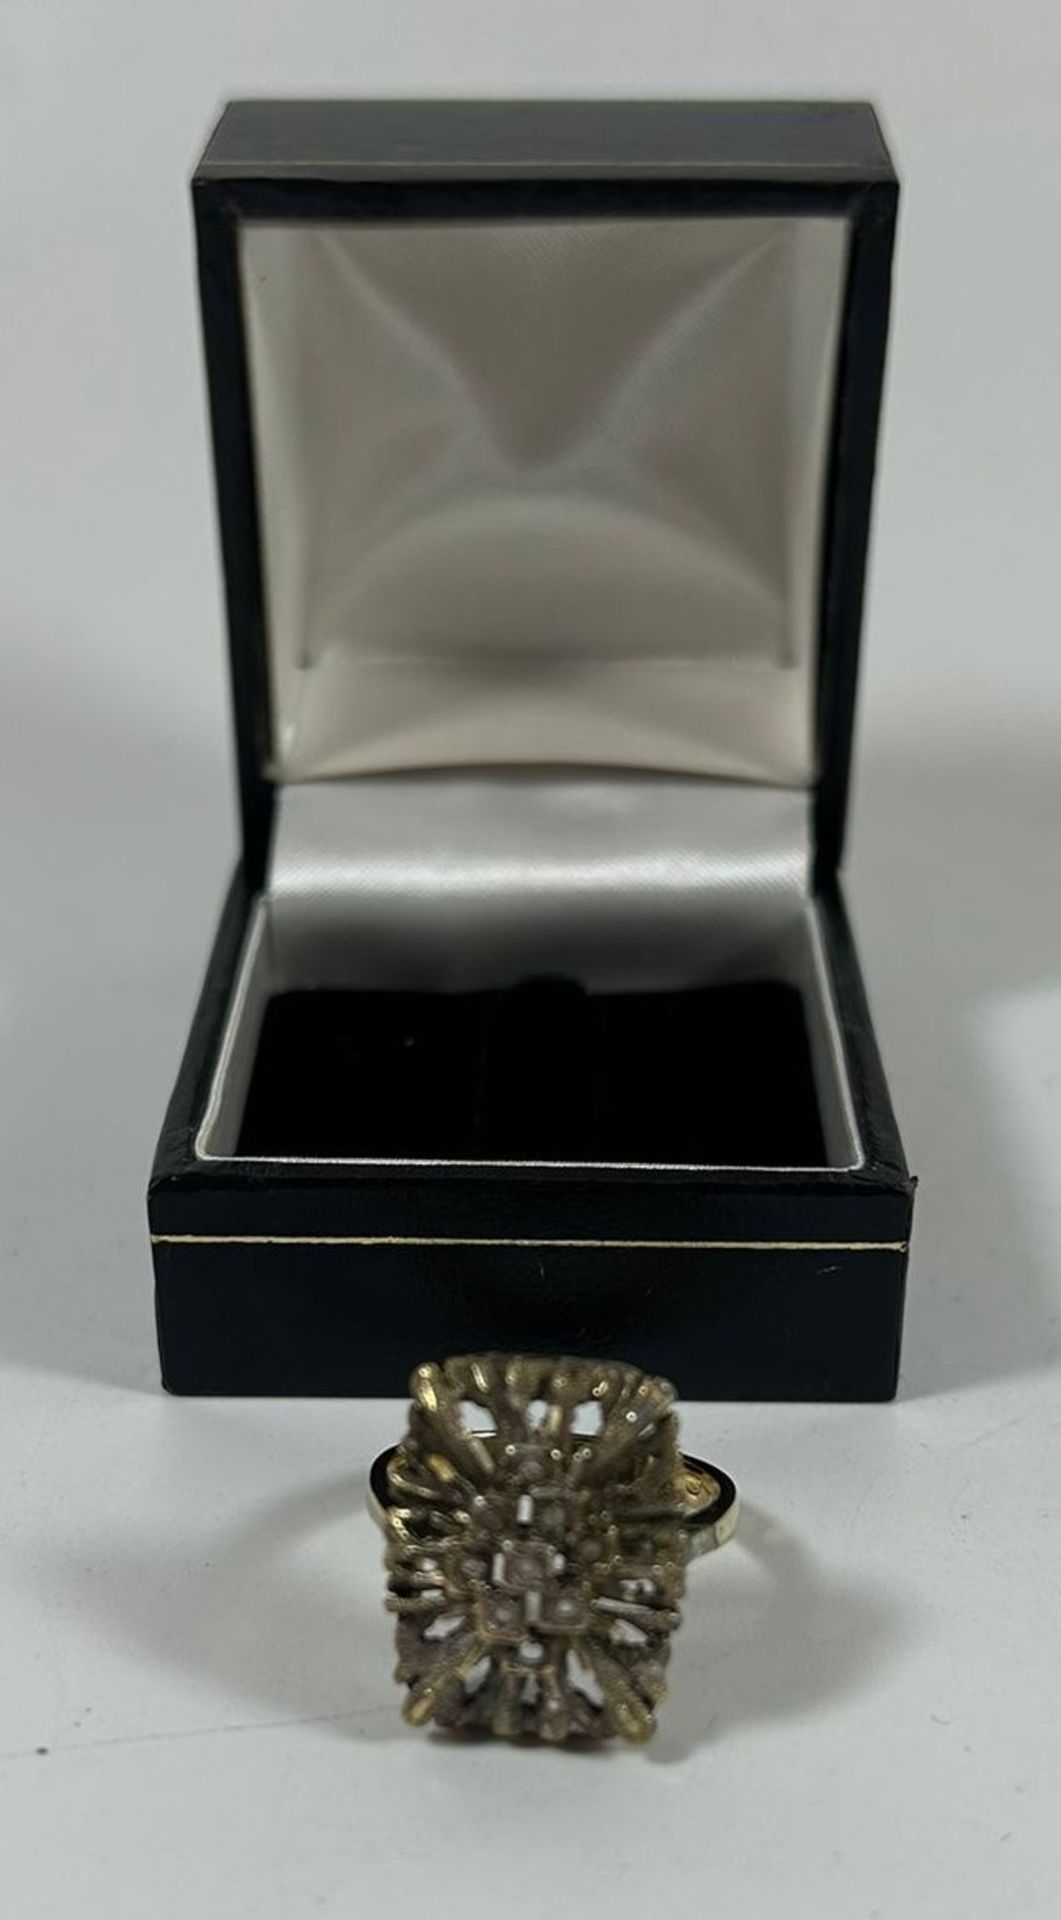 A BOXED ART DECO STYLE SILVER GILT MARCASITE RING - Image 2 of 4